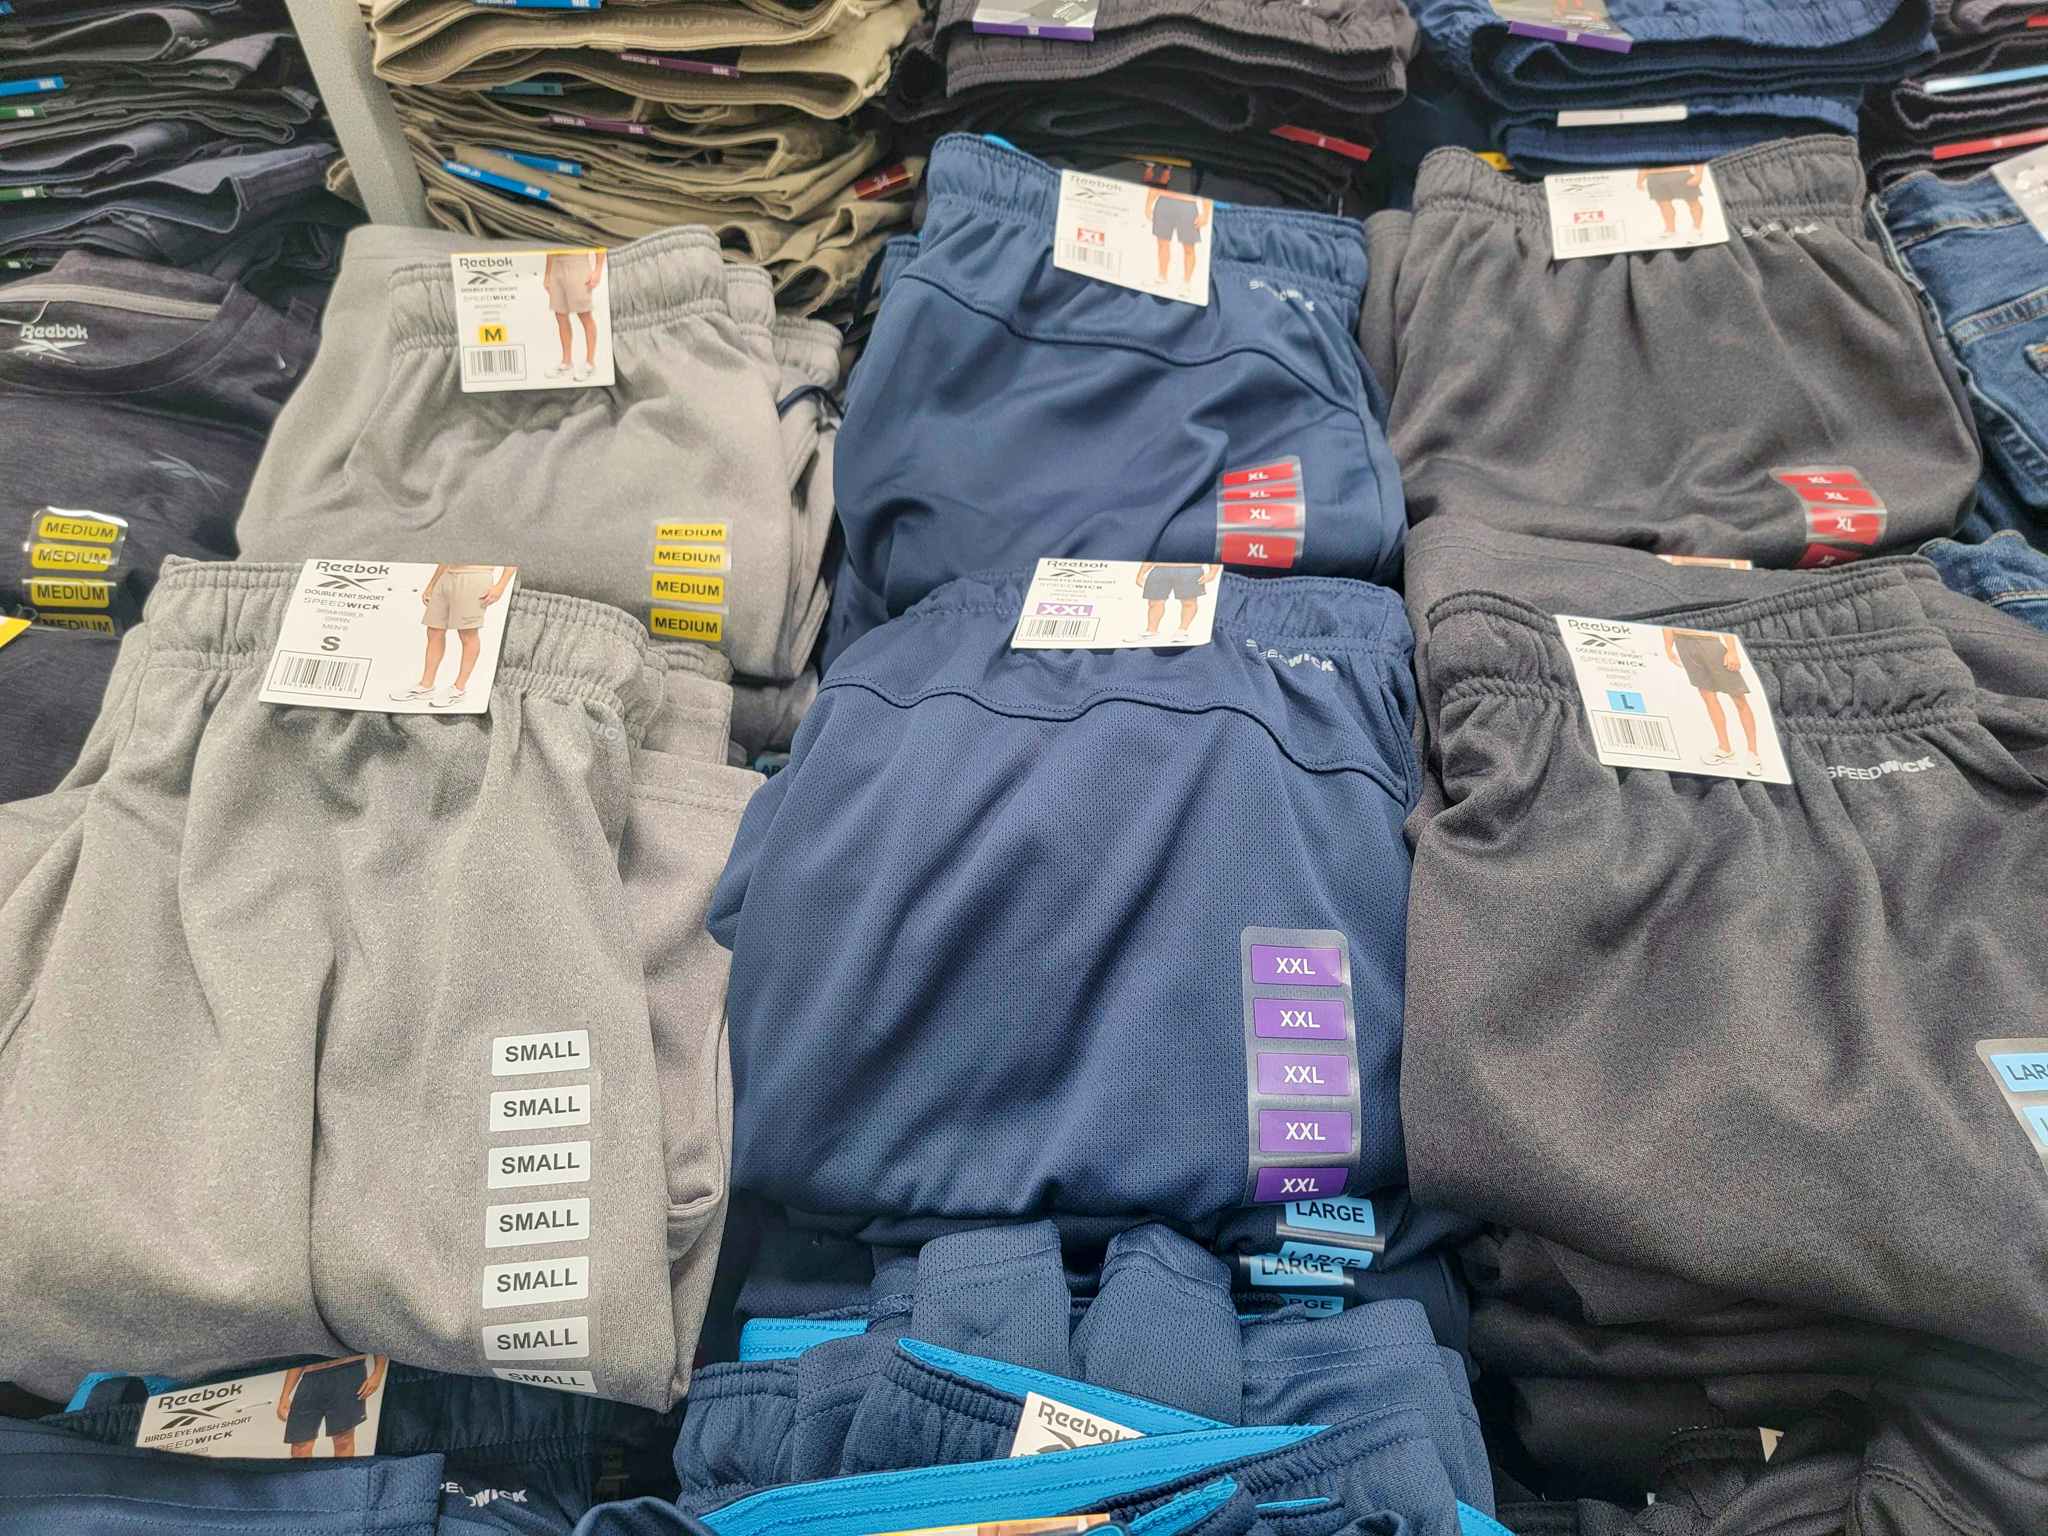 Men's Reebok shorts on a table in a variety of colors